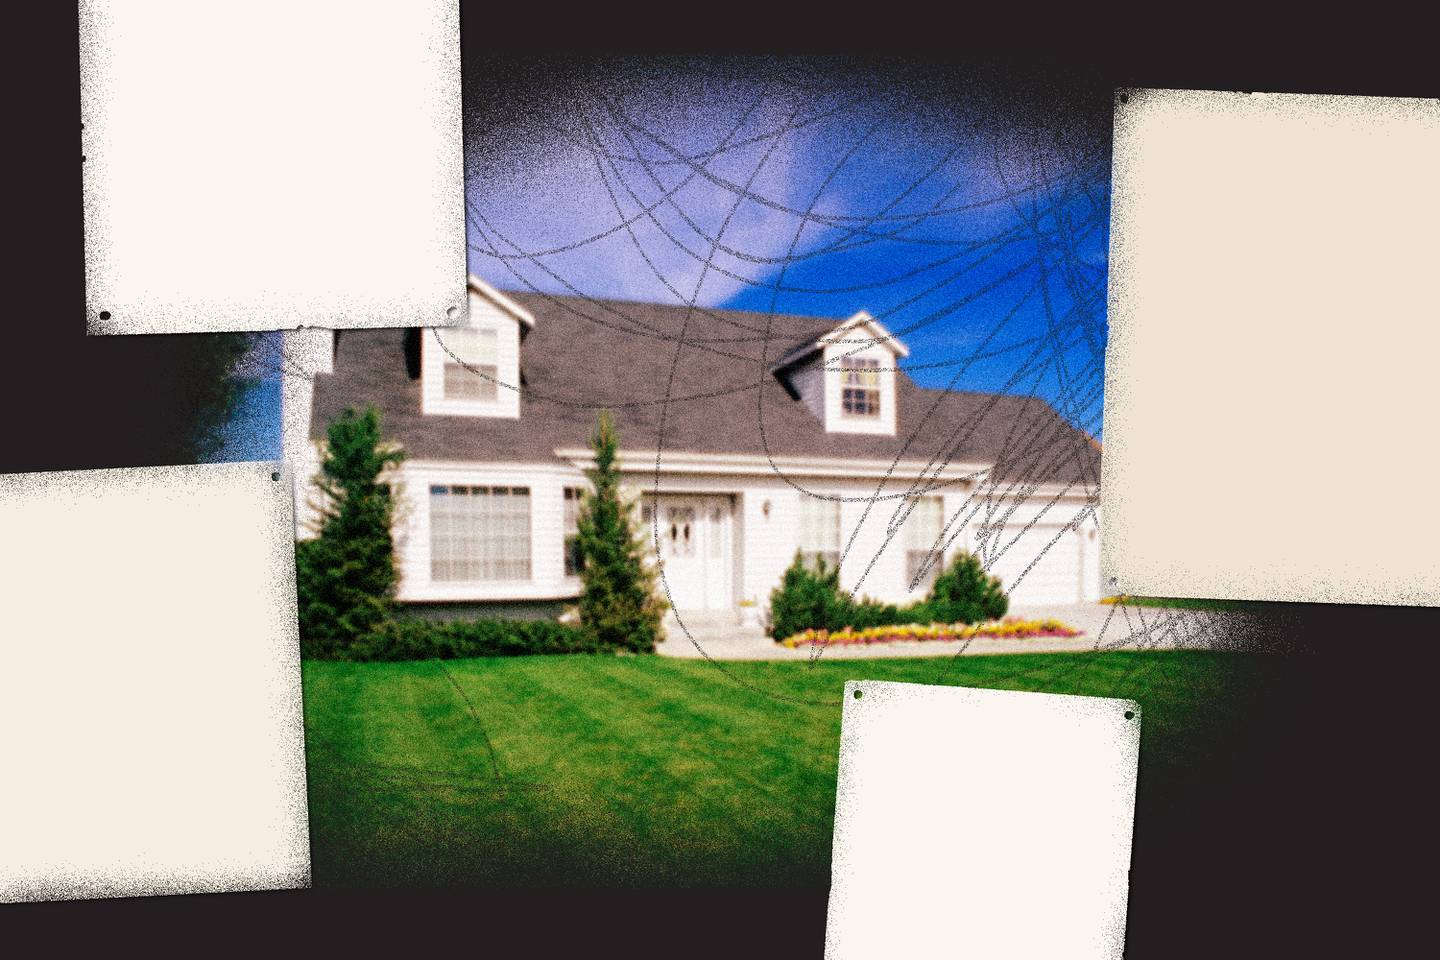 Photo collage of blurry white suburban house with driveway, surrounded by darkness and partially obscured by pieces of paper stuck on top of the image.